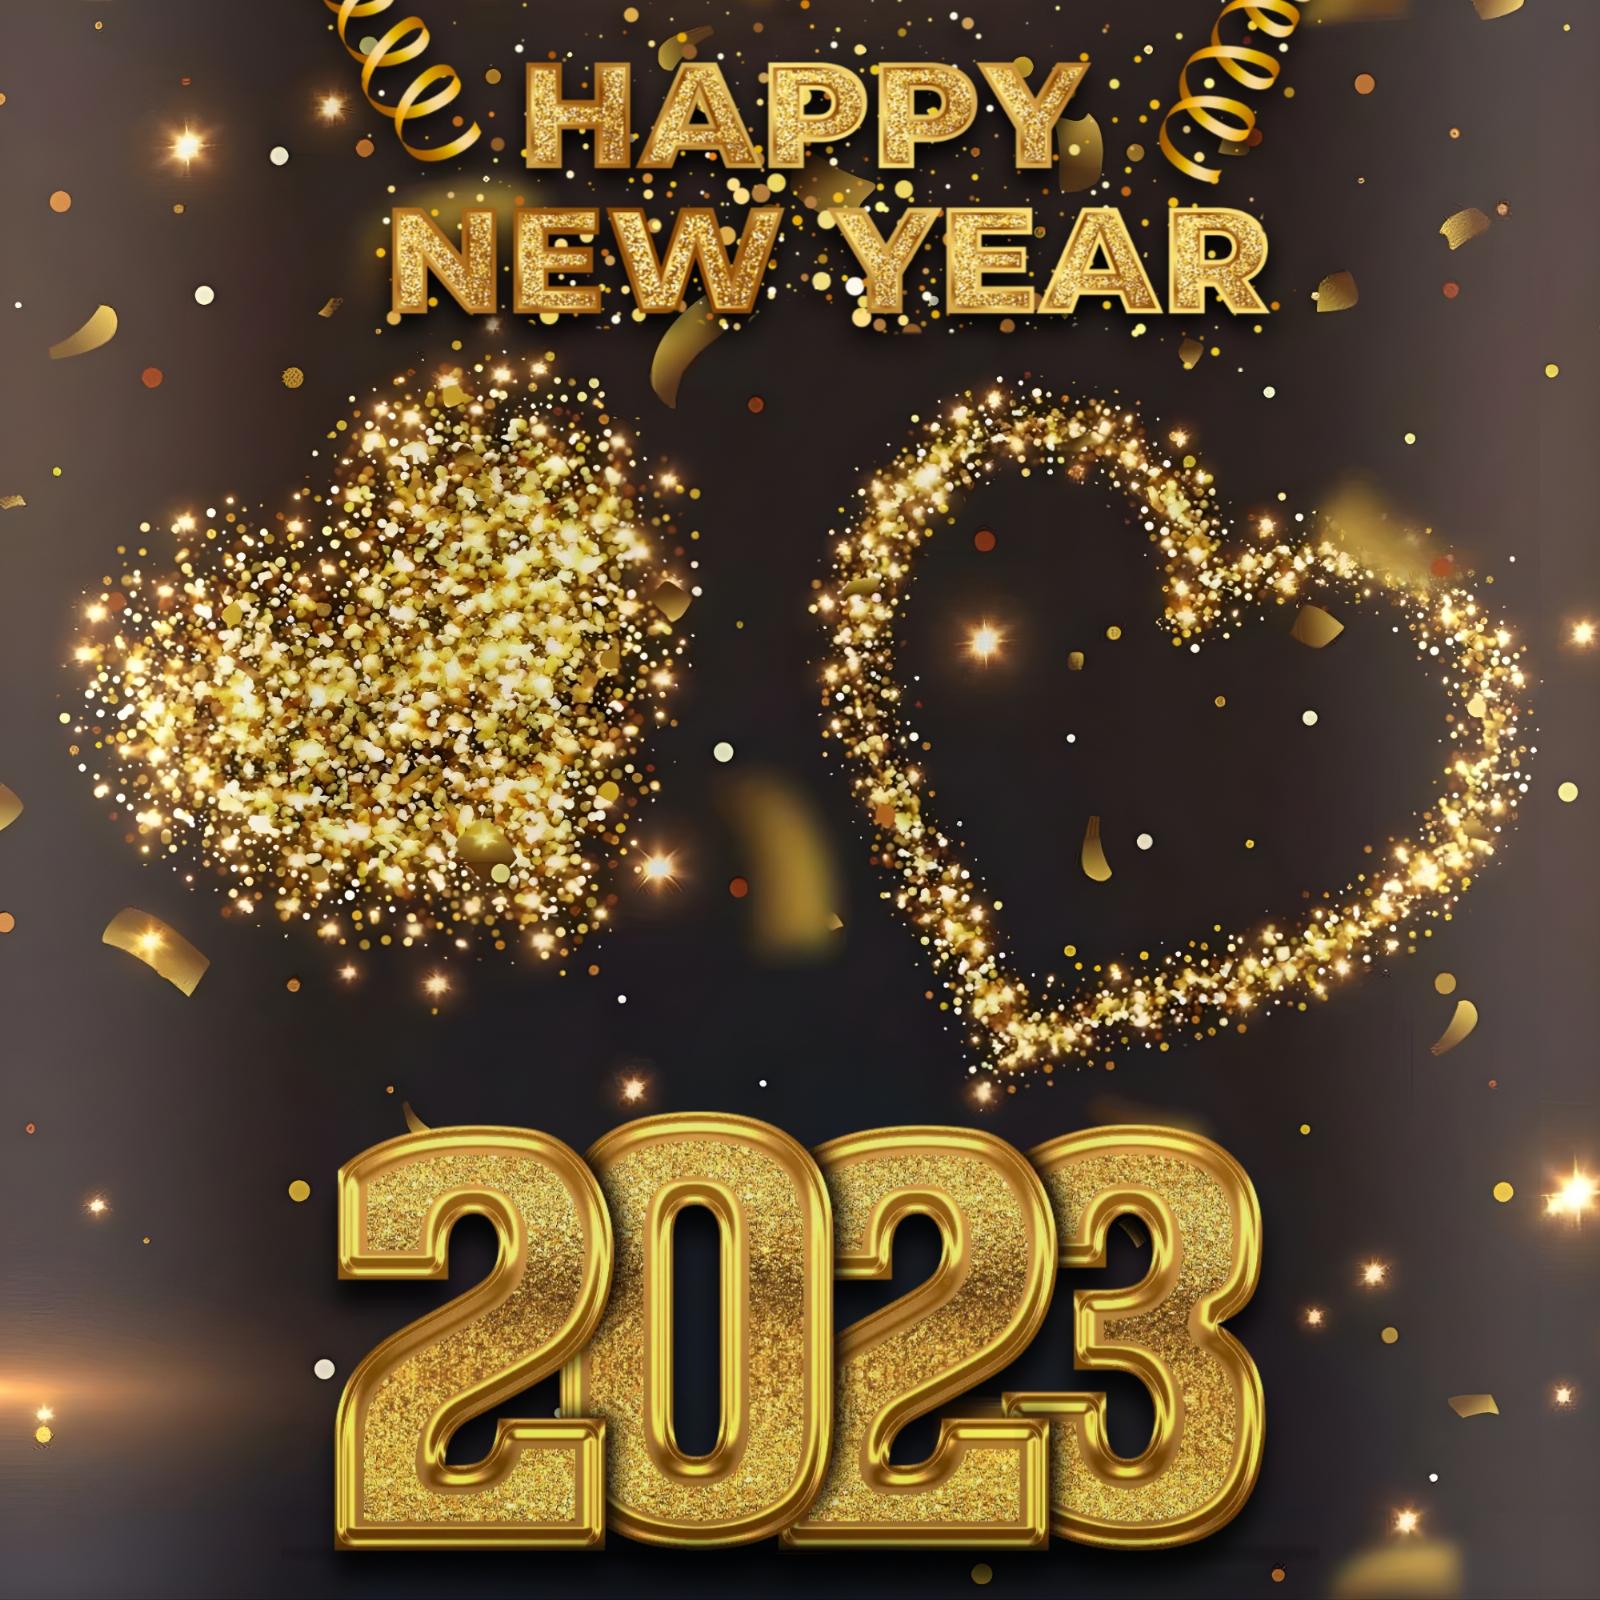 Happy New Year 2023 Love Images